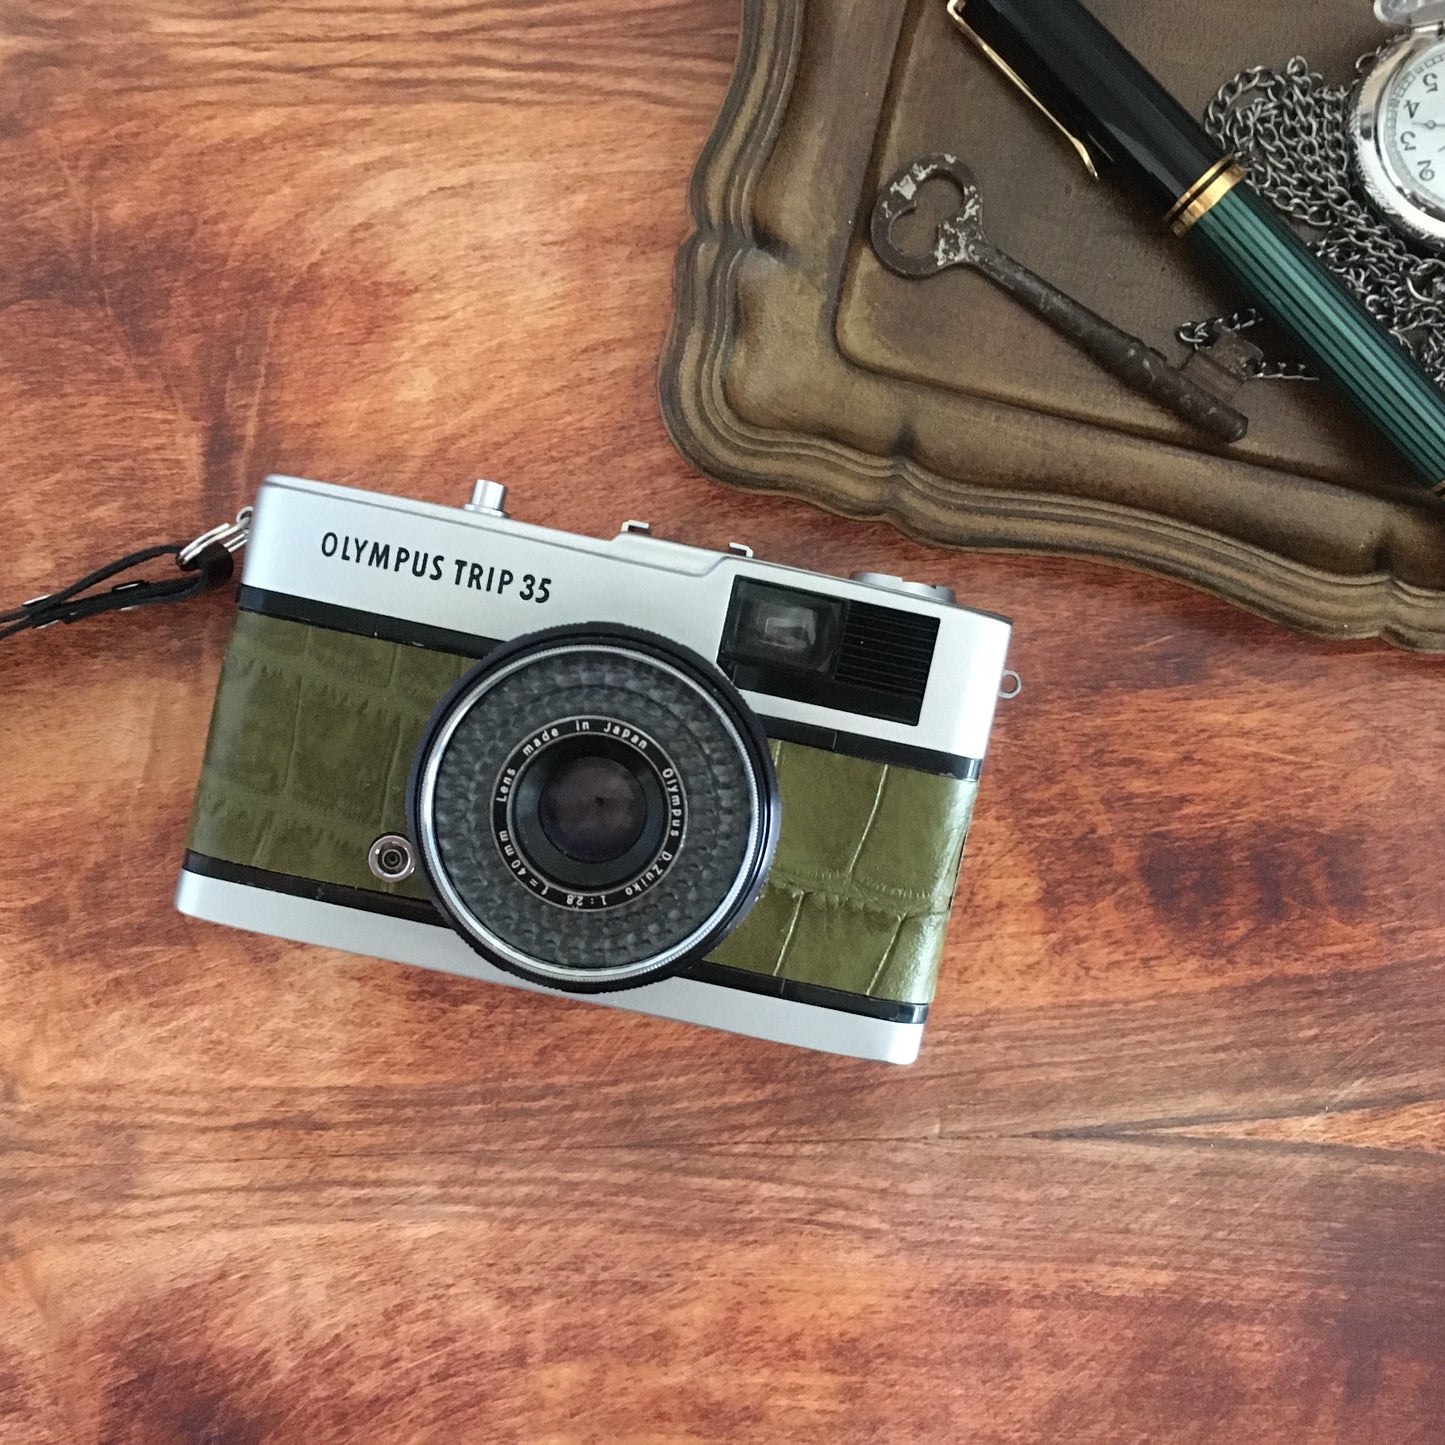 Olympus TRIP35  with crocodile stamped matcha green leather